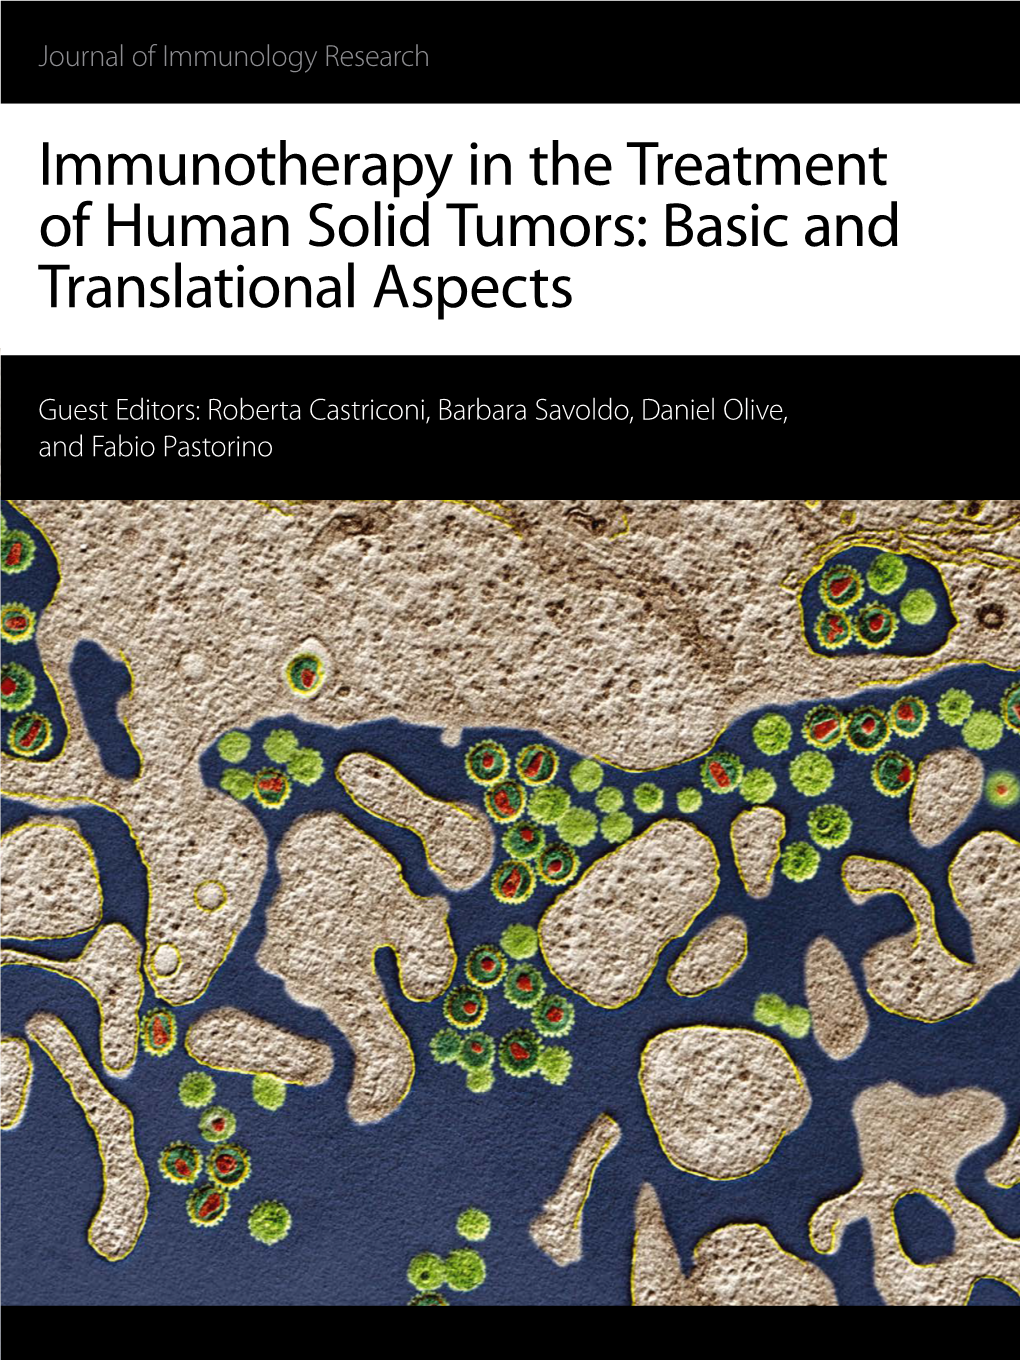 Immunotherapy in the Treatment of Human Solid Tumors: Basic and Translational Aspects